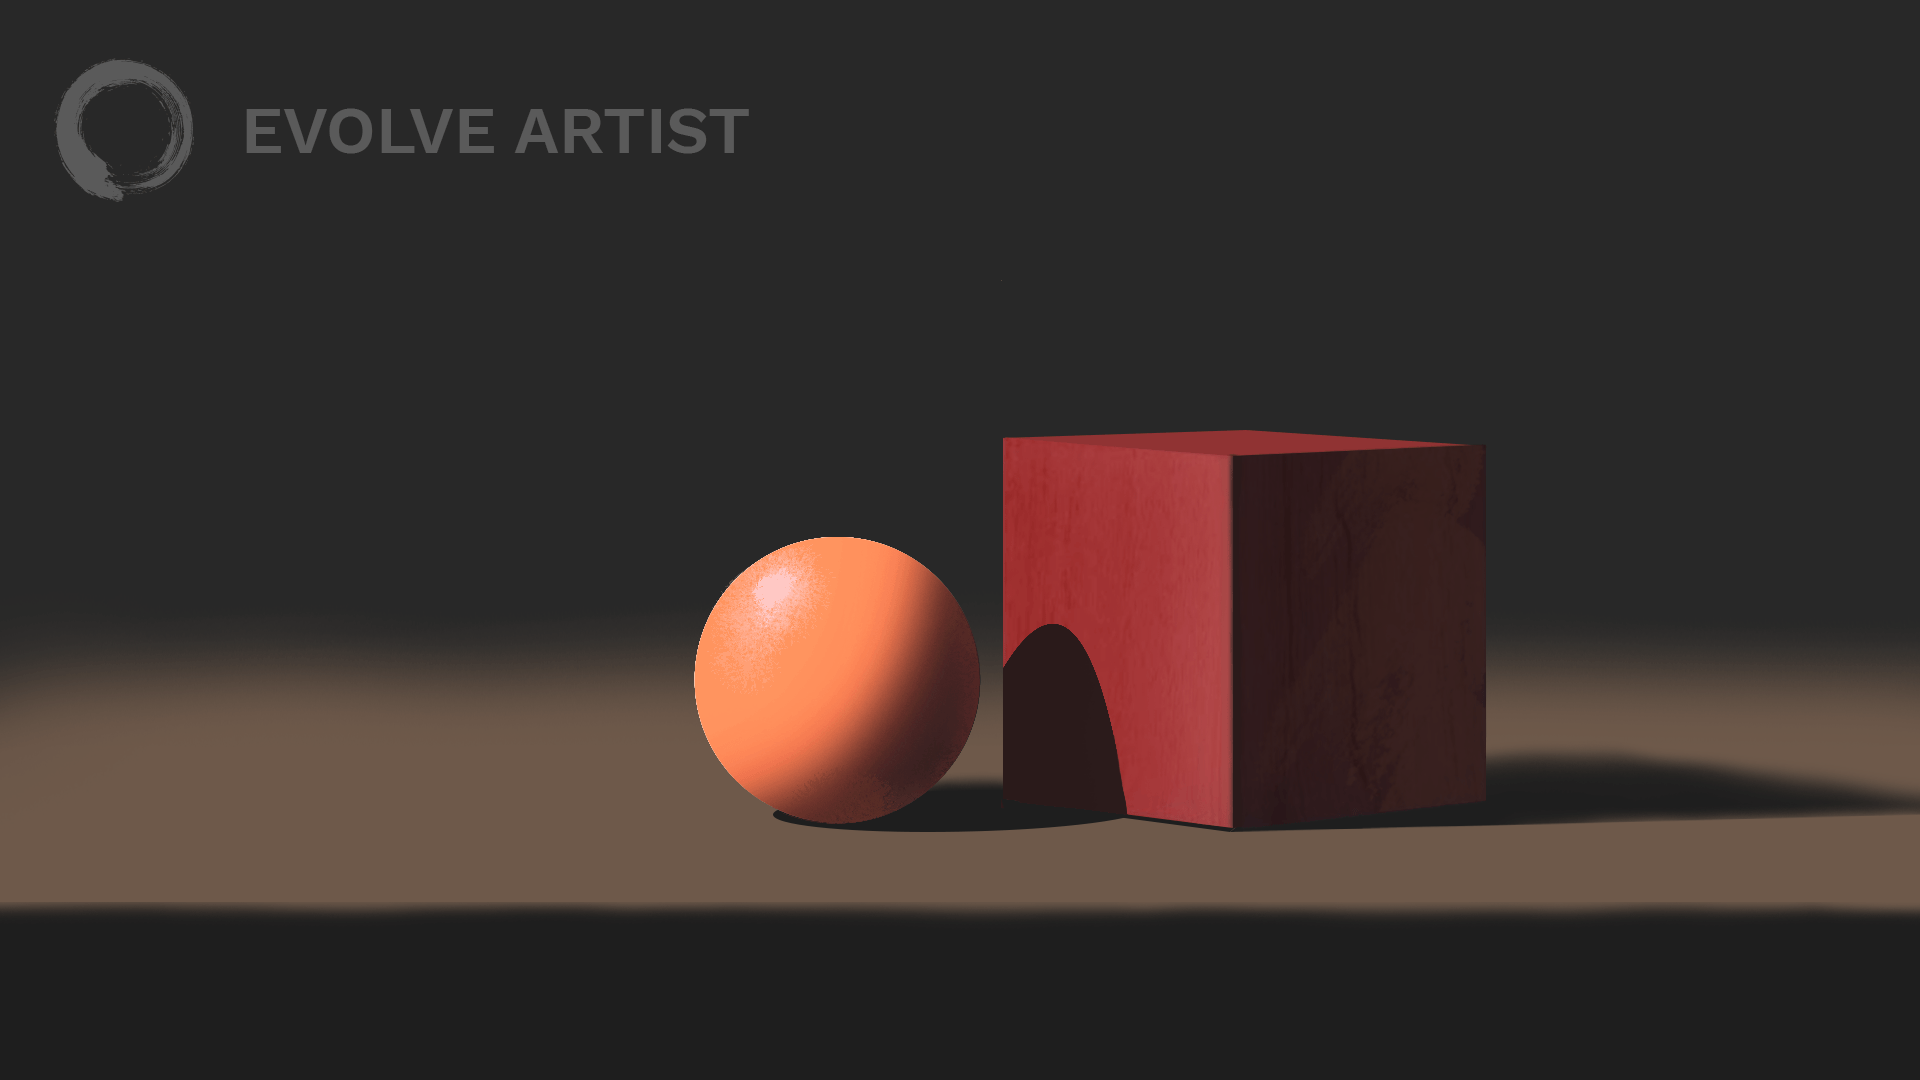 To approach a simple subject matter such as a ball and a cube, you begin by finding your values and edges. 